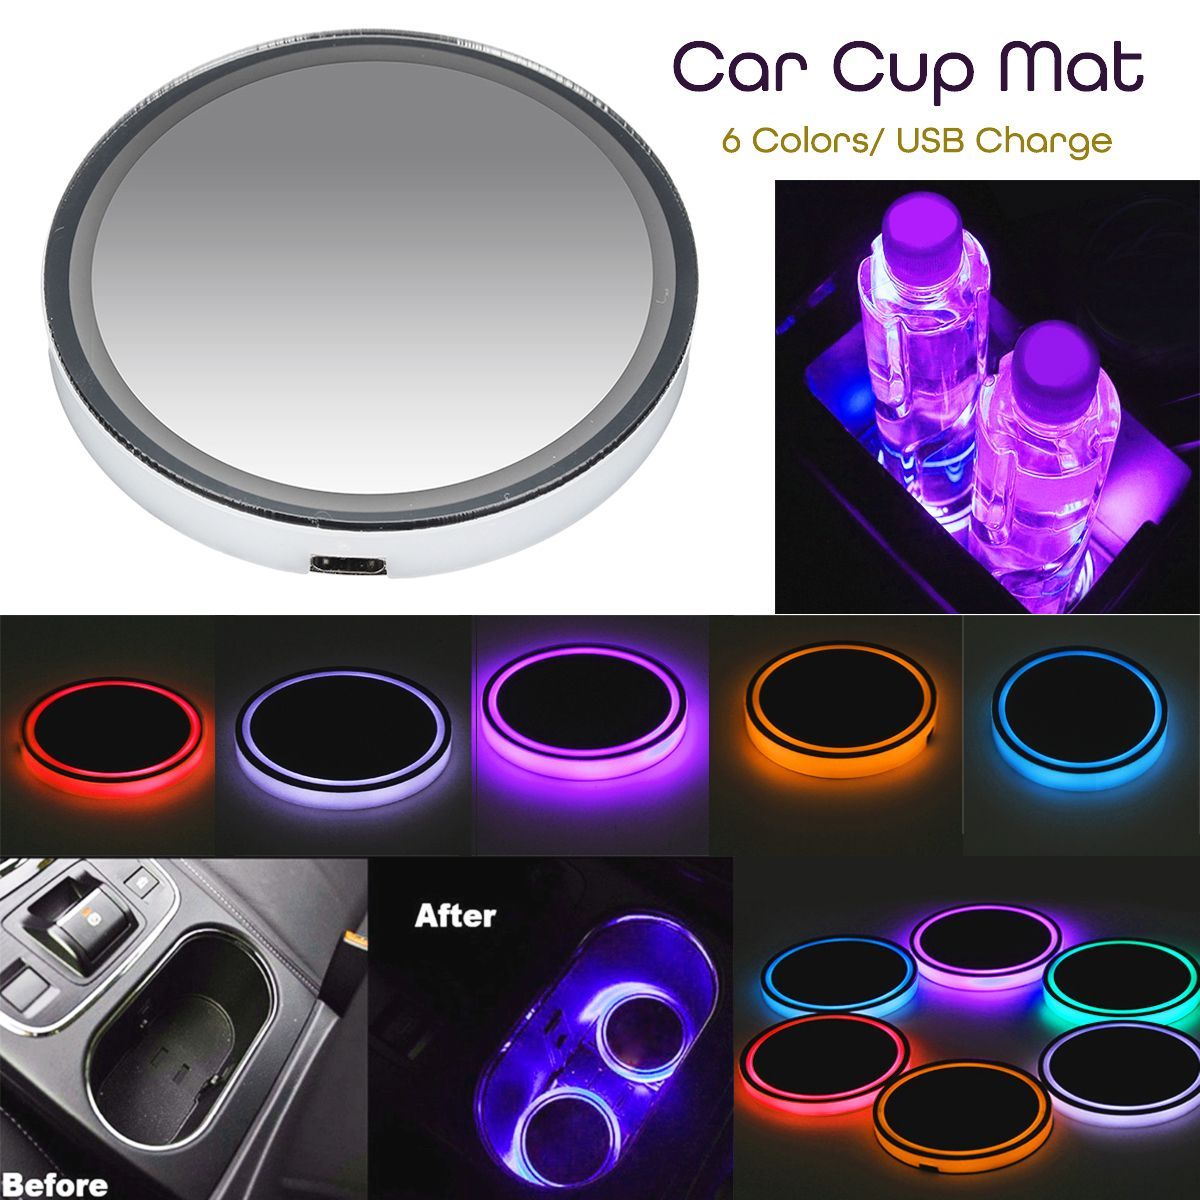 LED-Car-Cup-Holder-Pad-Mat-Auto-Atmosphere-Interior-Lights-USB-Rechargeable-1614260